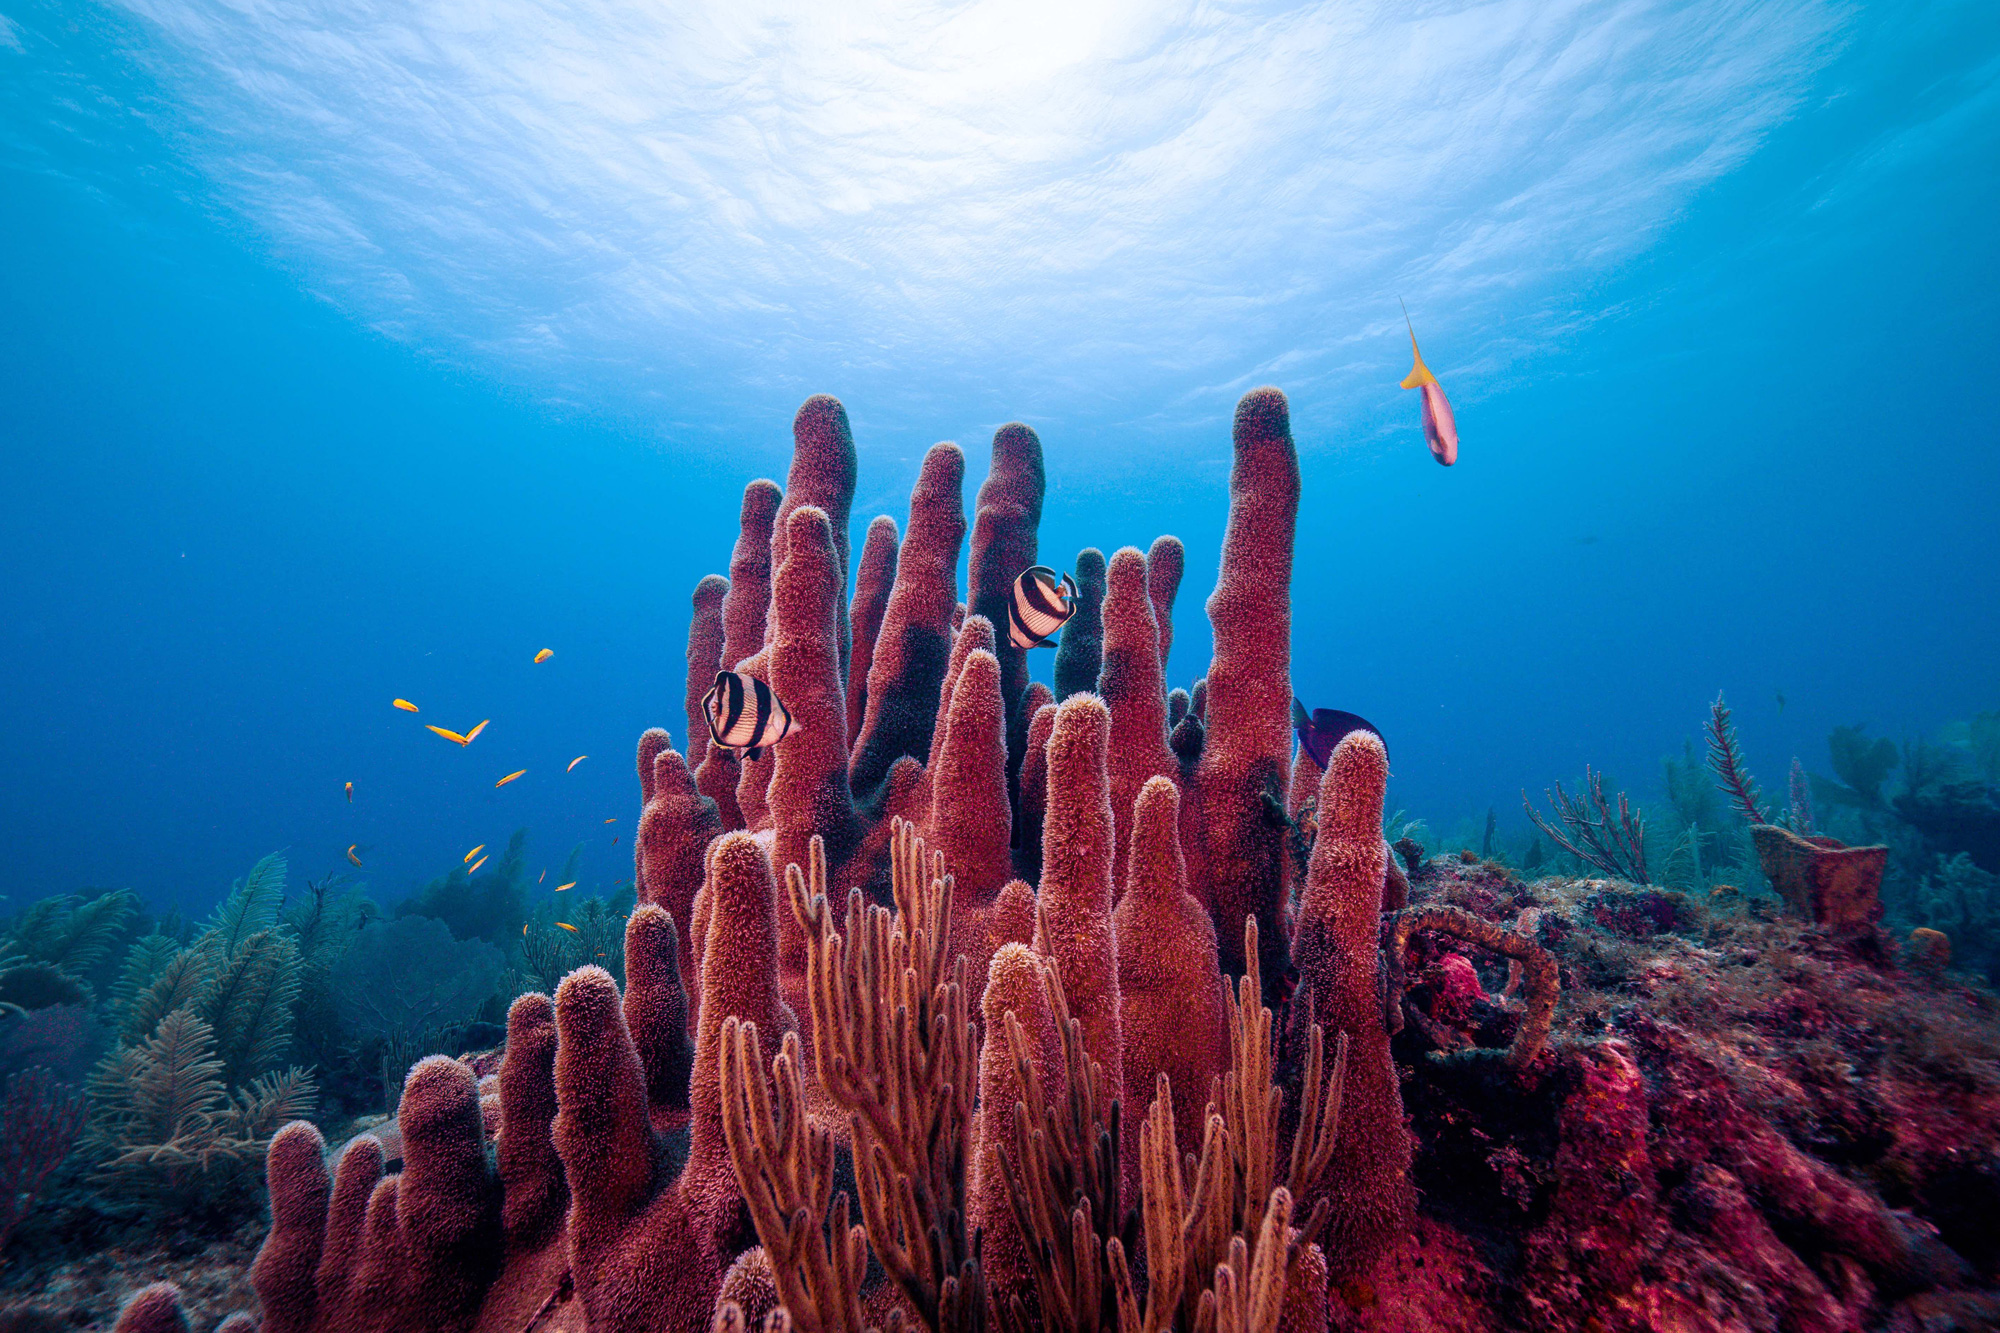 Scientists discover slimy microbes that may help keep coral reefs healthy |  MIT News | Massachusetts Institute of Technology